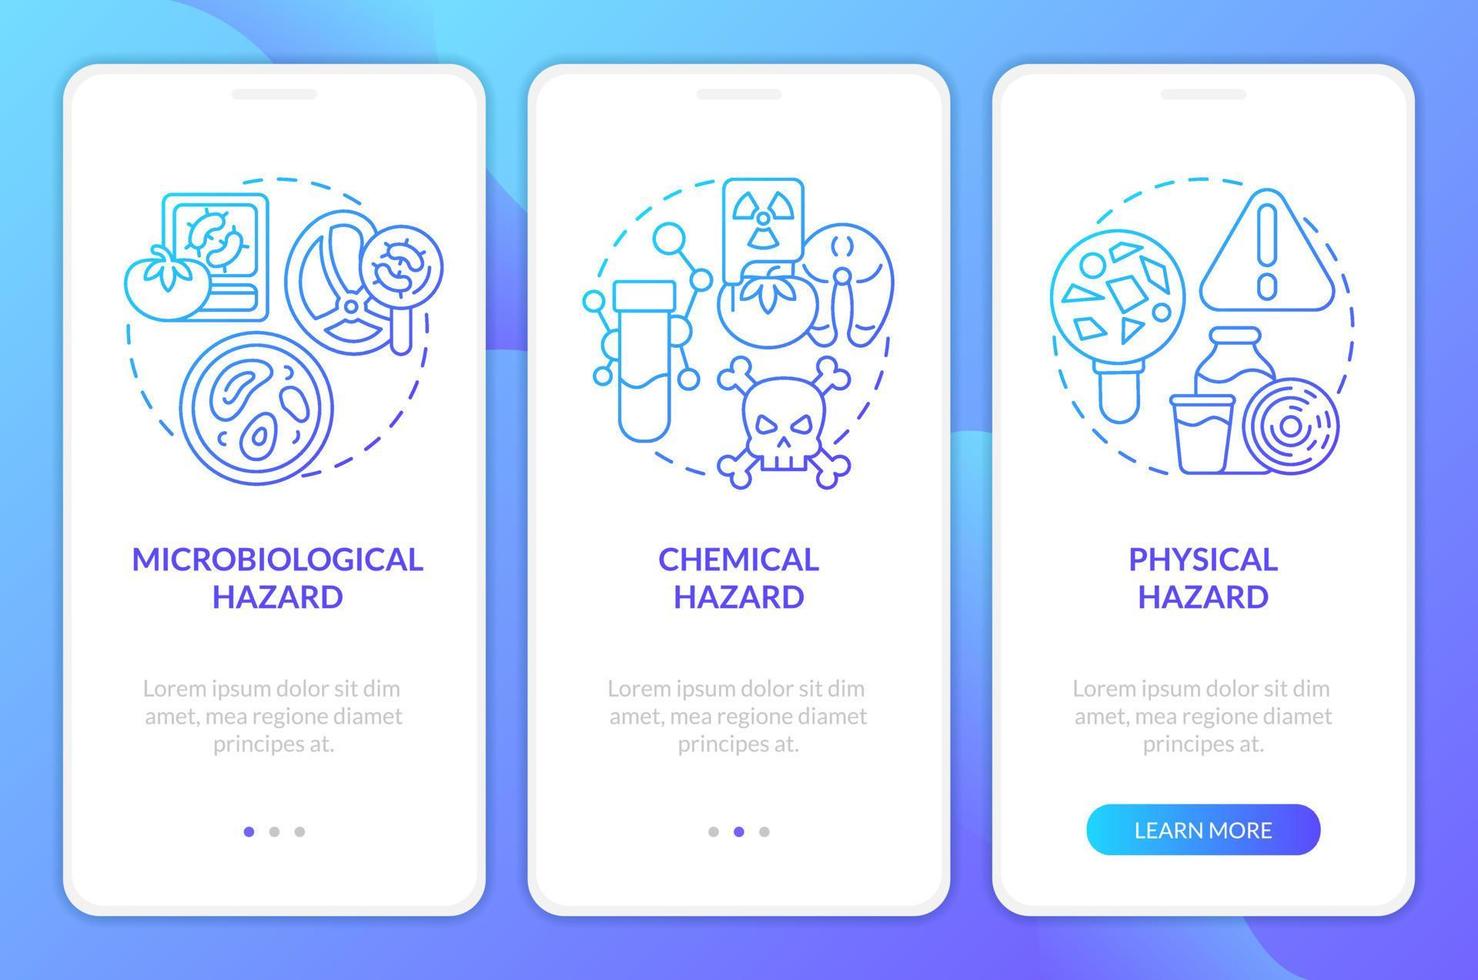 Food safety hazard blue gradient onboarding mobile app screen. Health walkthrough 3 steps graphic instructions with linear concepts. UI, UX, GUI template vector